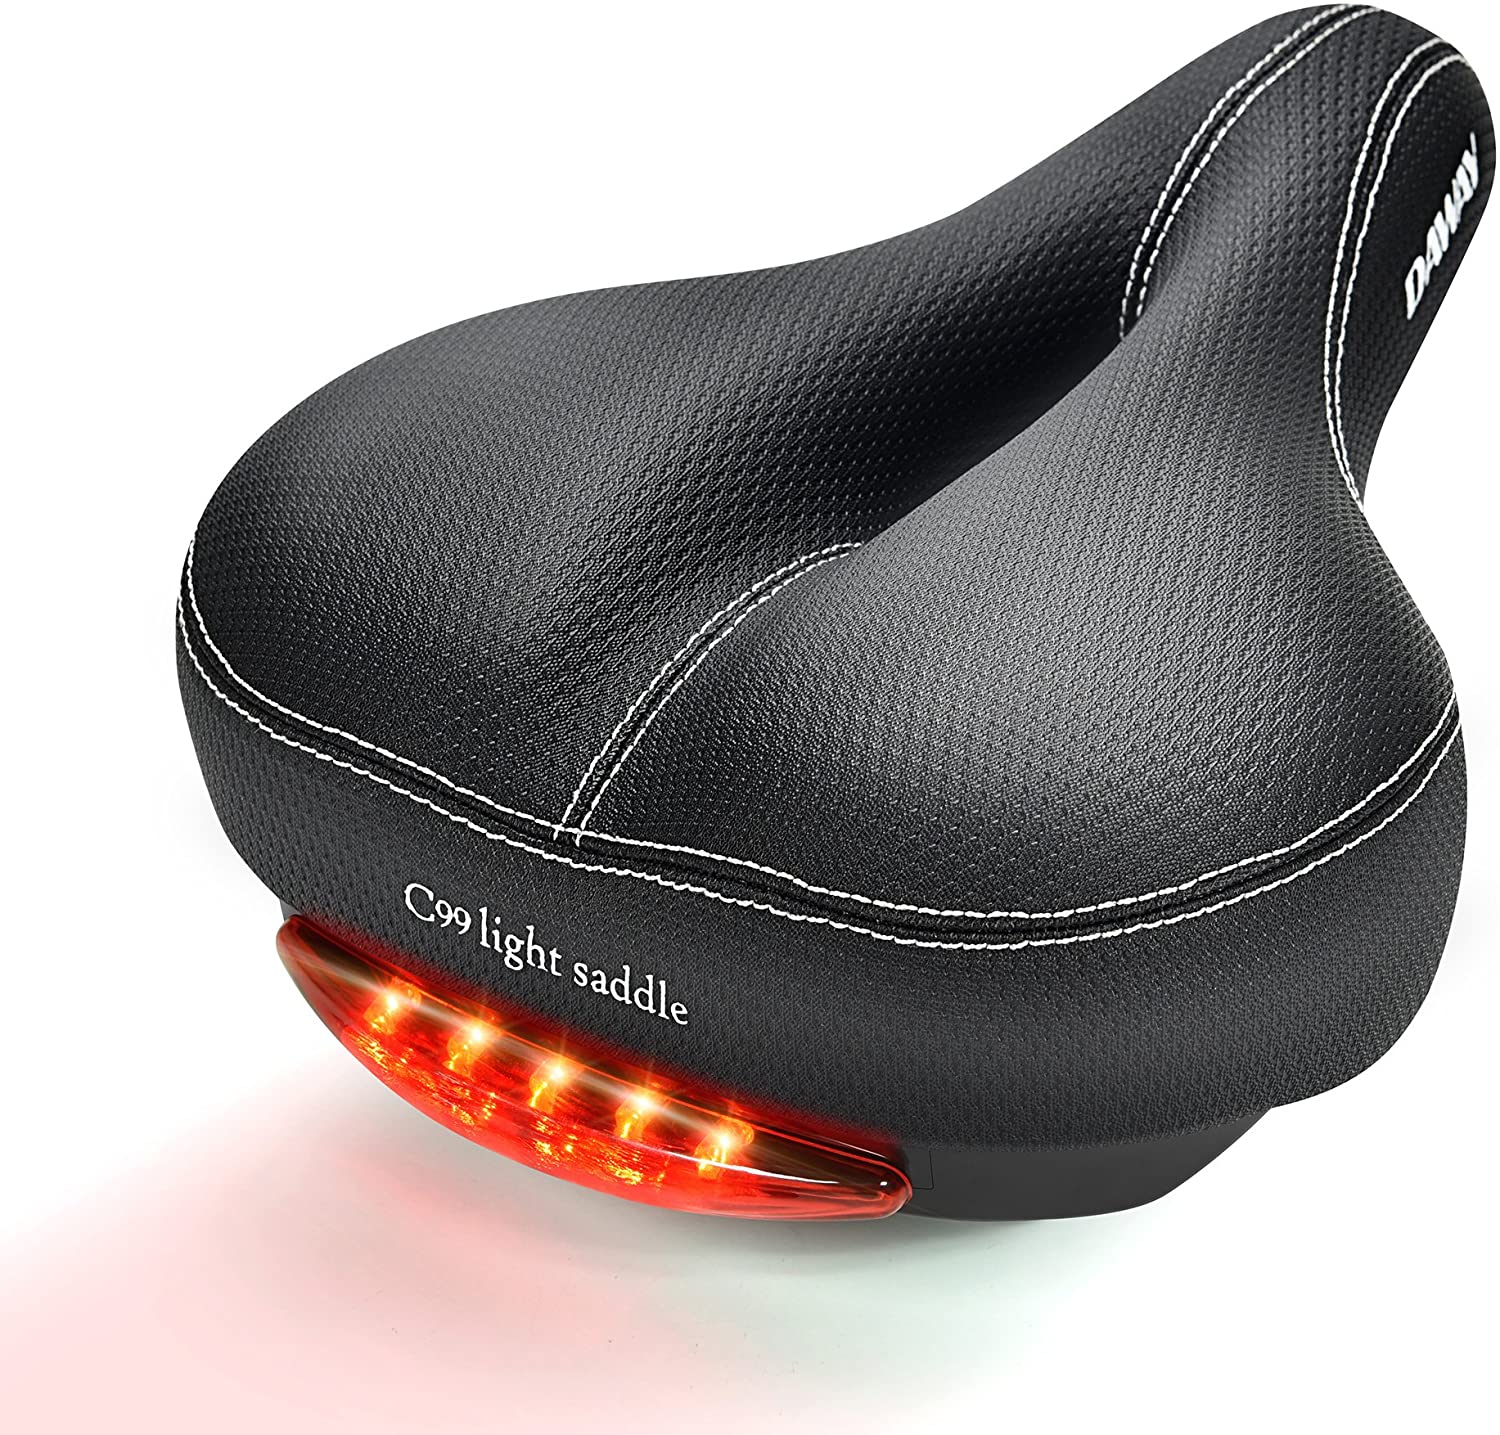 DAWAY Memory Foam & Leather Wide Bicycle Saddle With Taillight